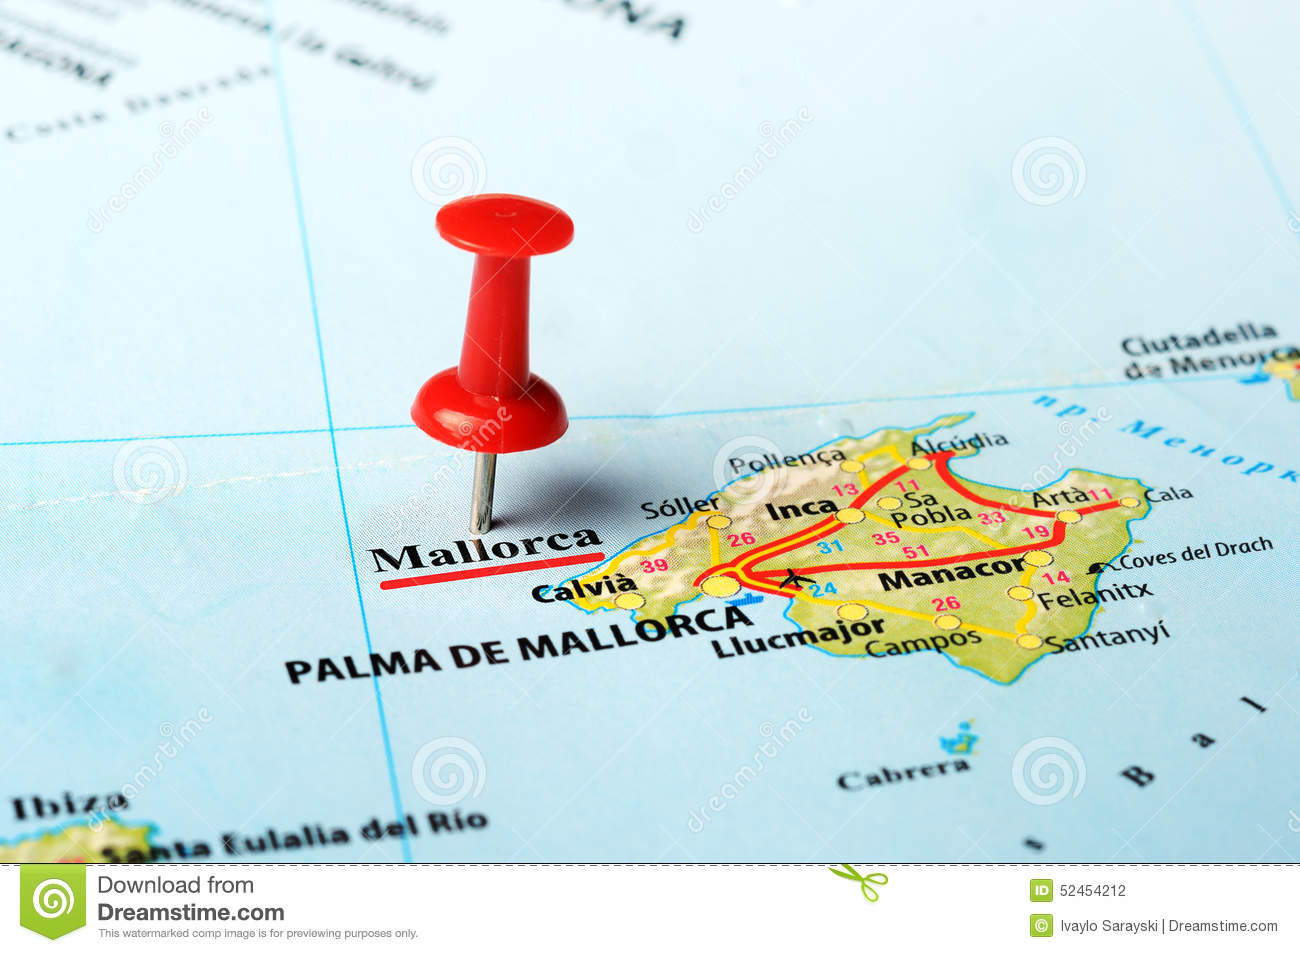 Mallorca clipart #10, Download drawings